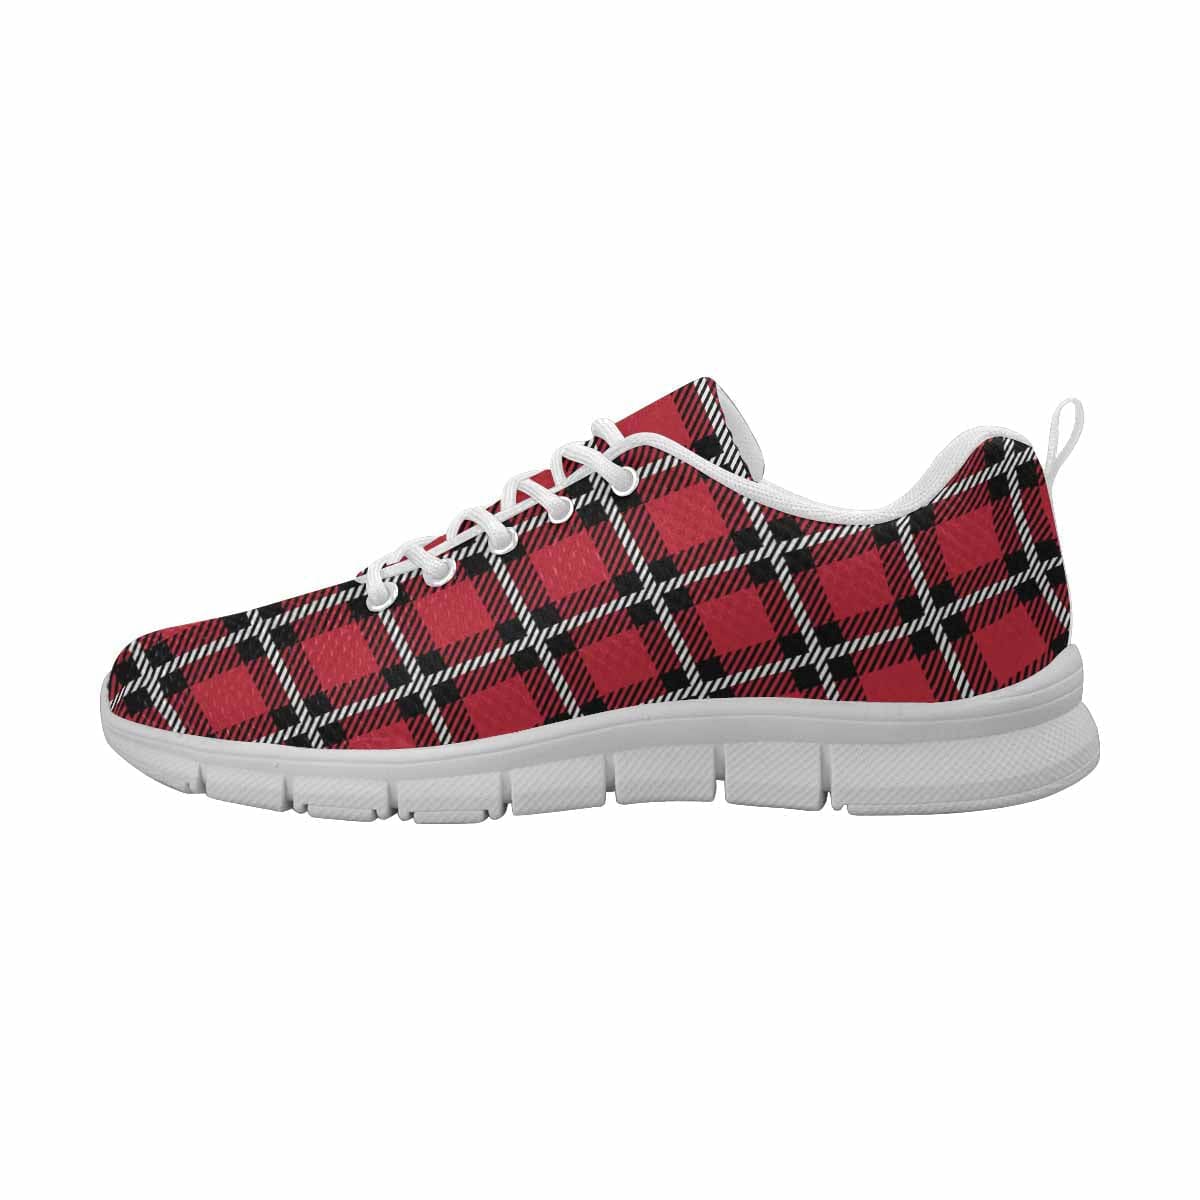 Sneakers For Men Buffalo Plaid Red And White - Running Shoes Dg867 - Mens |